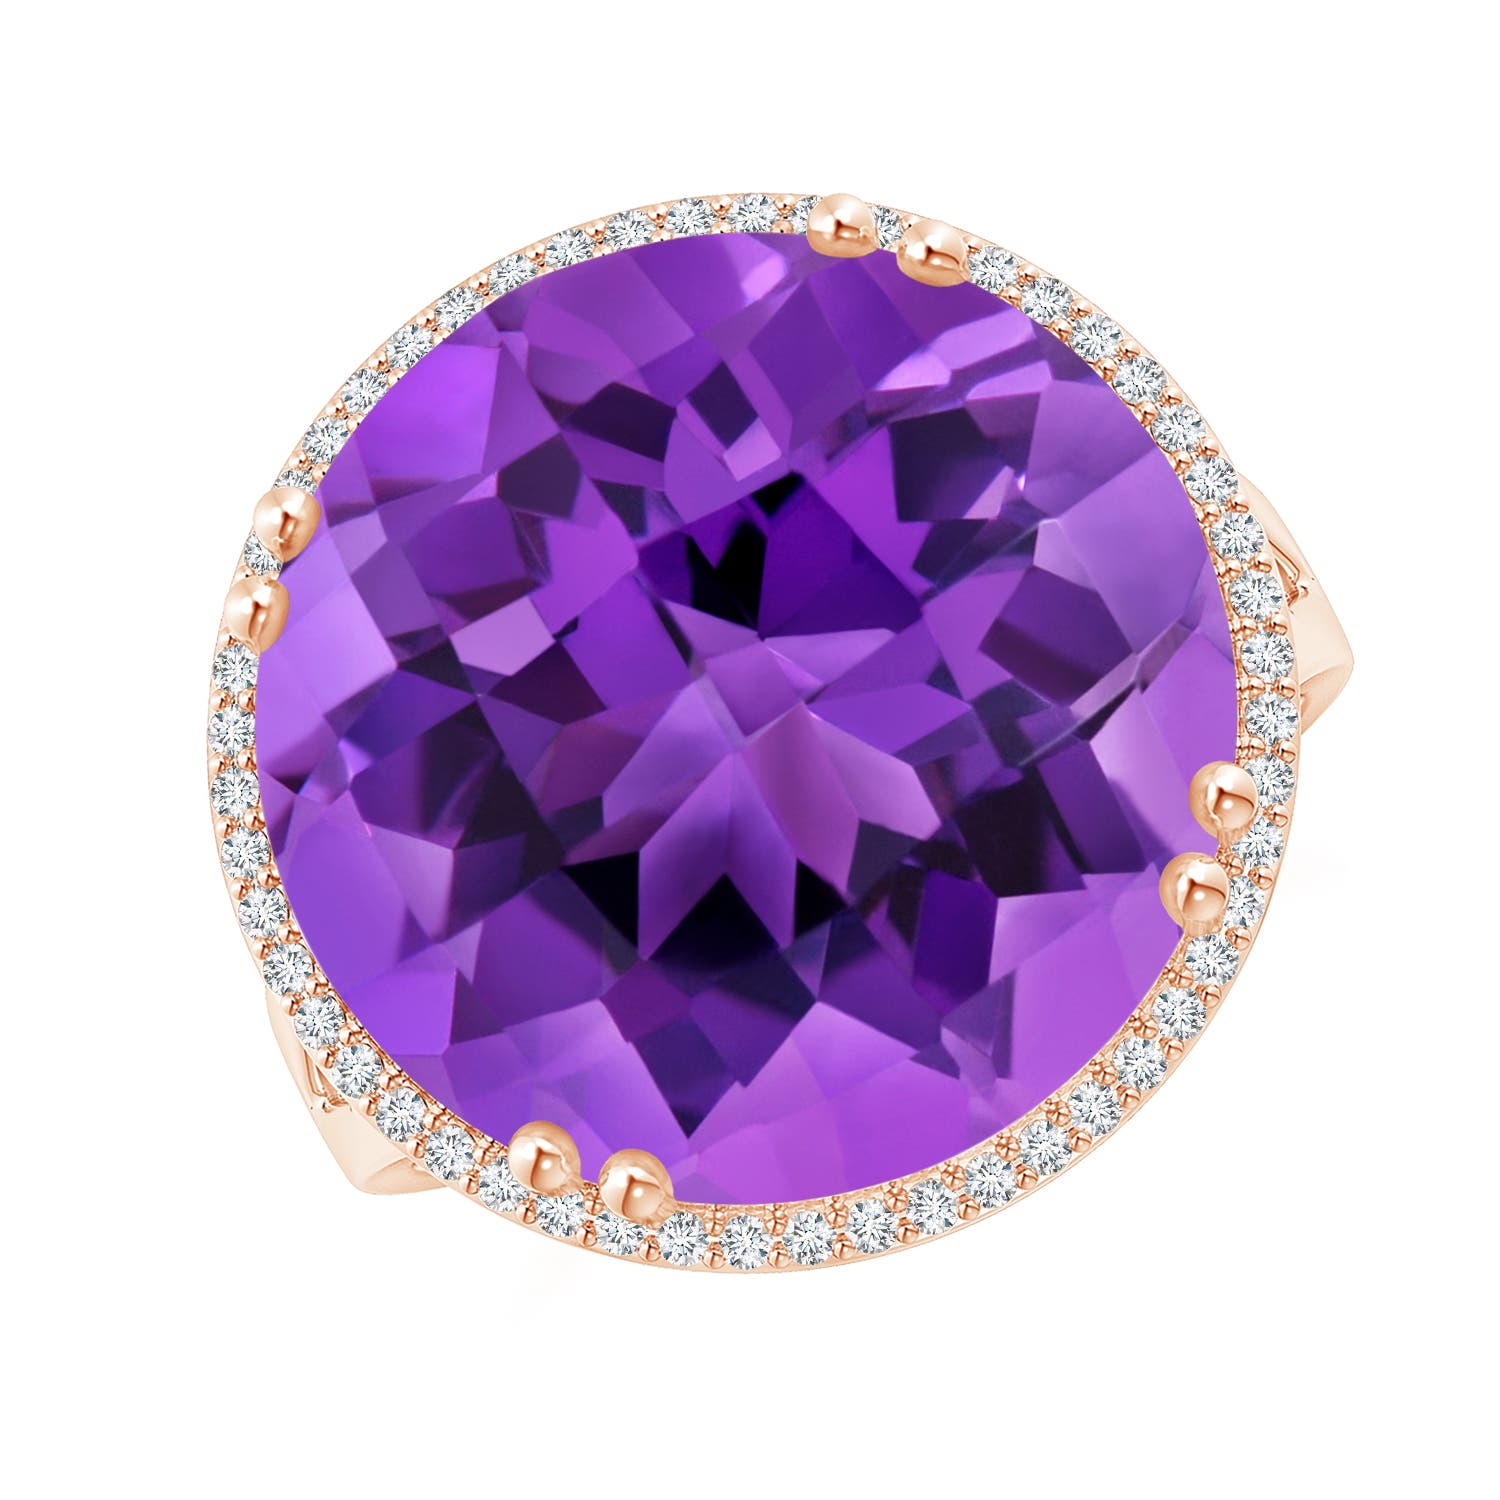 AAA - Amethyst / 15.18 CT / 14 KT Rose Gold